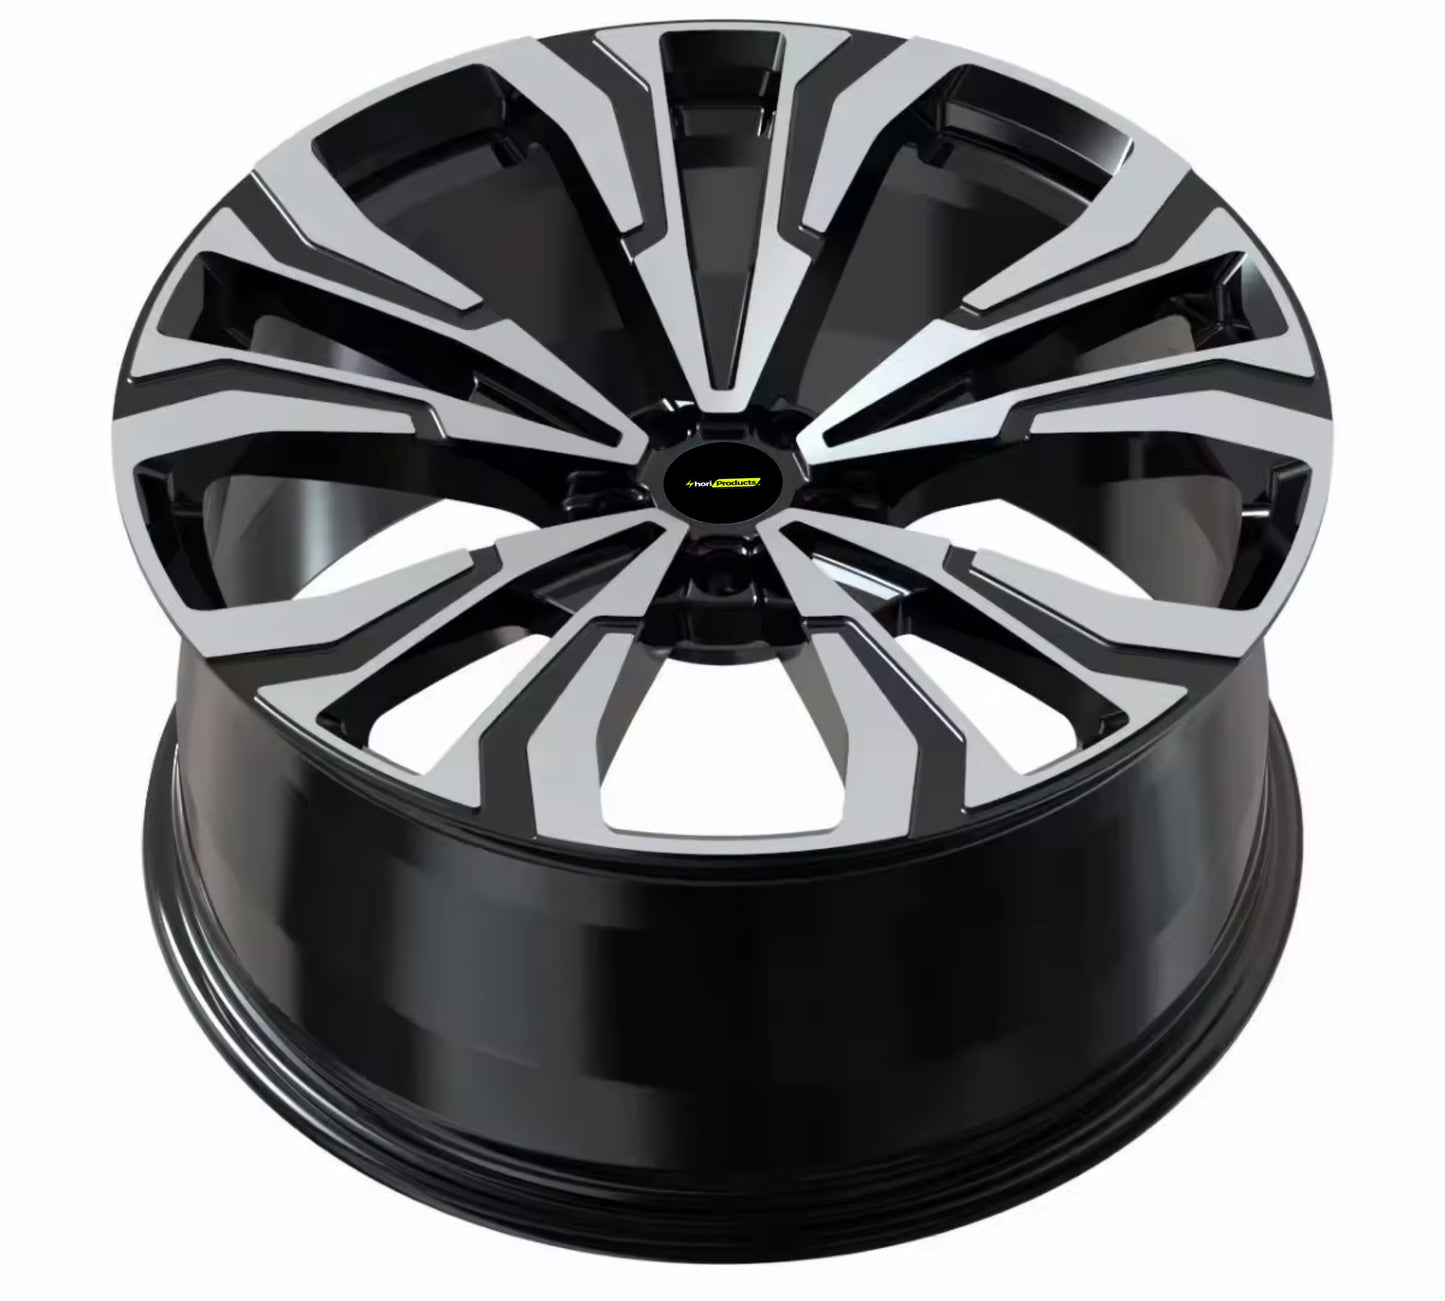 GalaxiaRise Alloy Wheels: Forged Aluminum for Model S 5X120 (Set of 4)